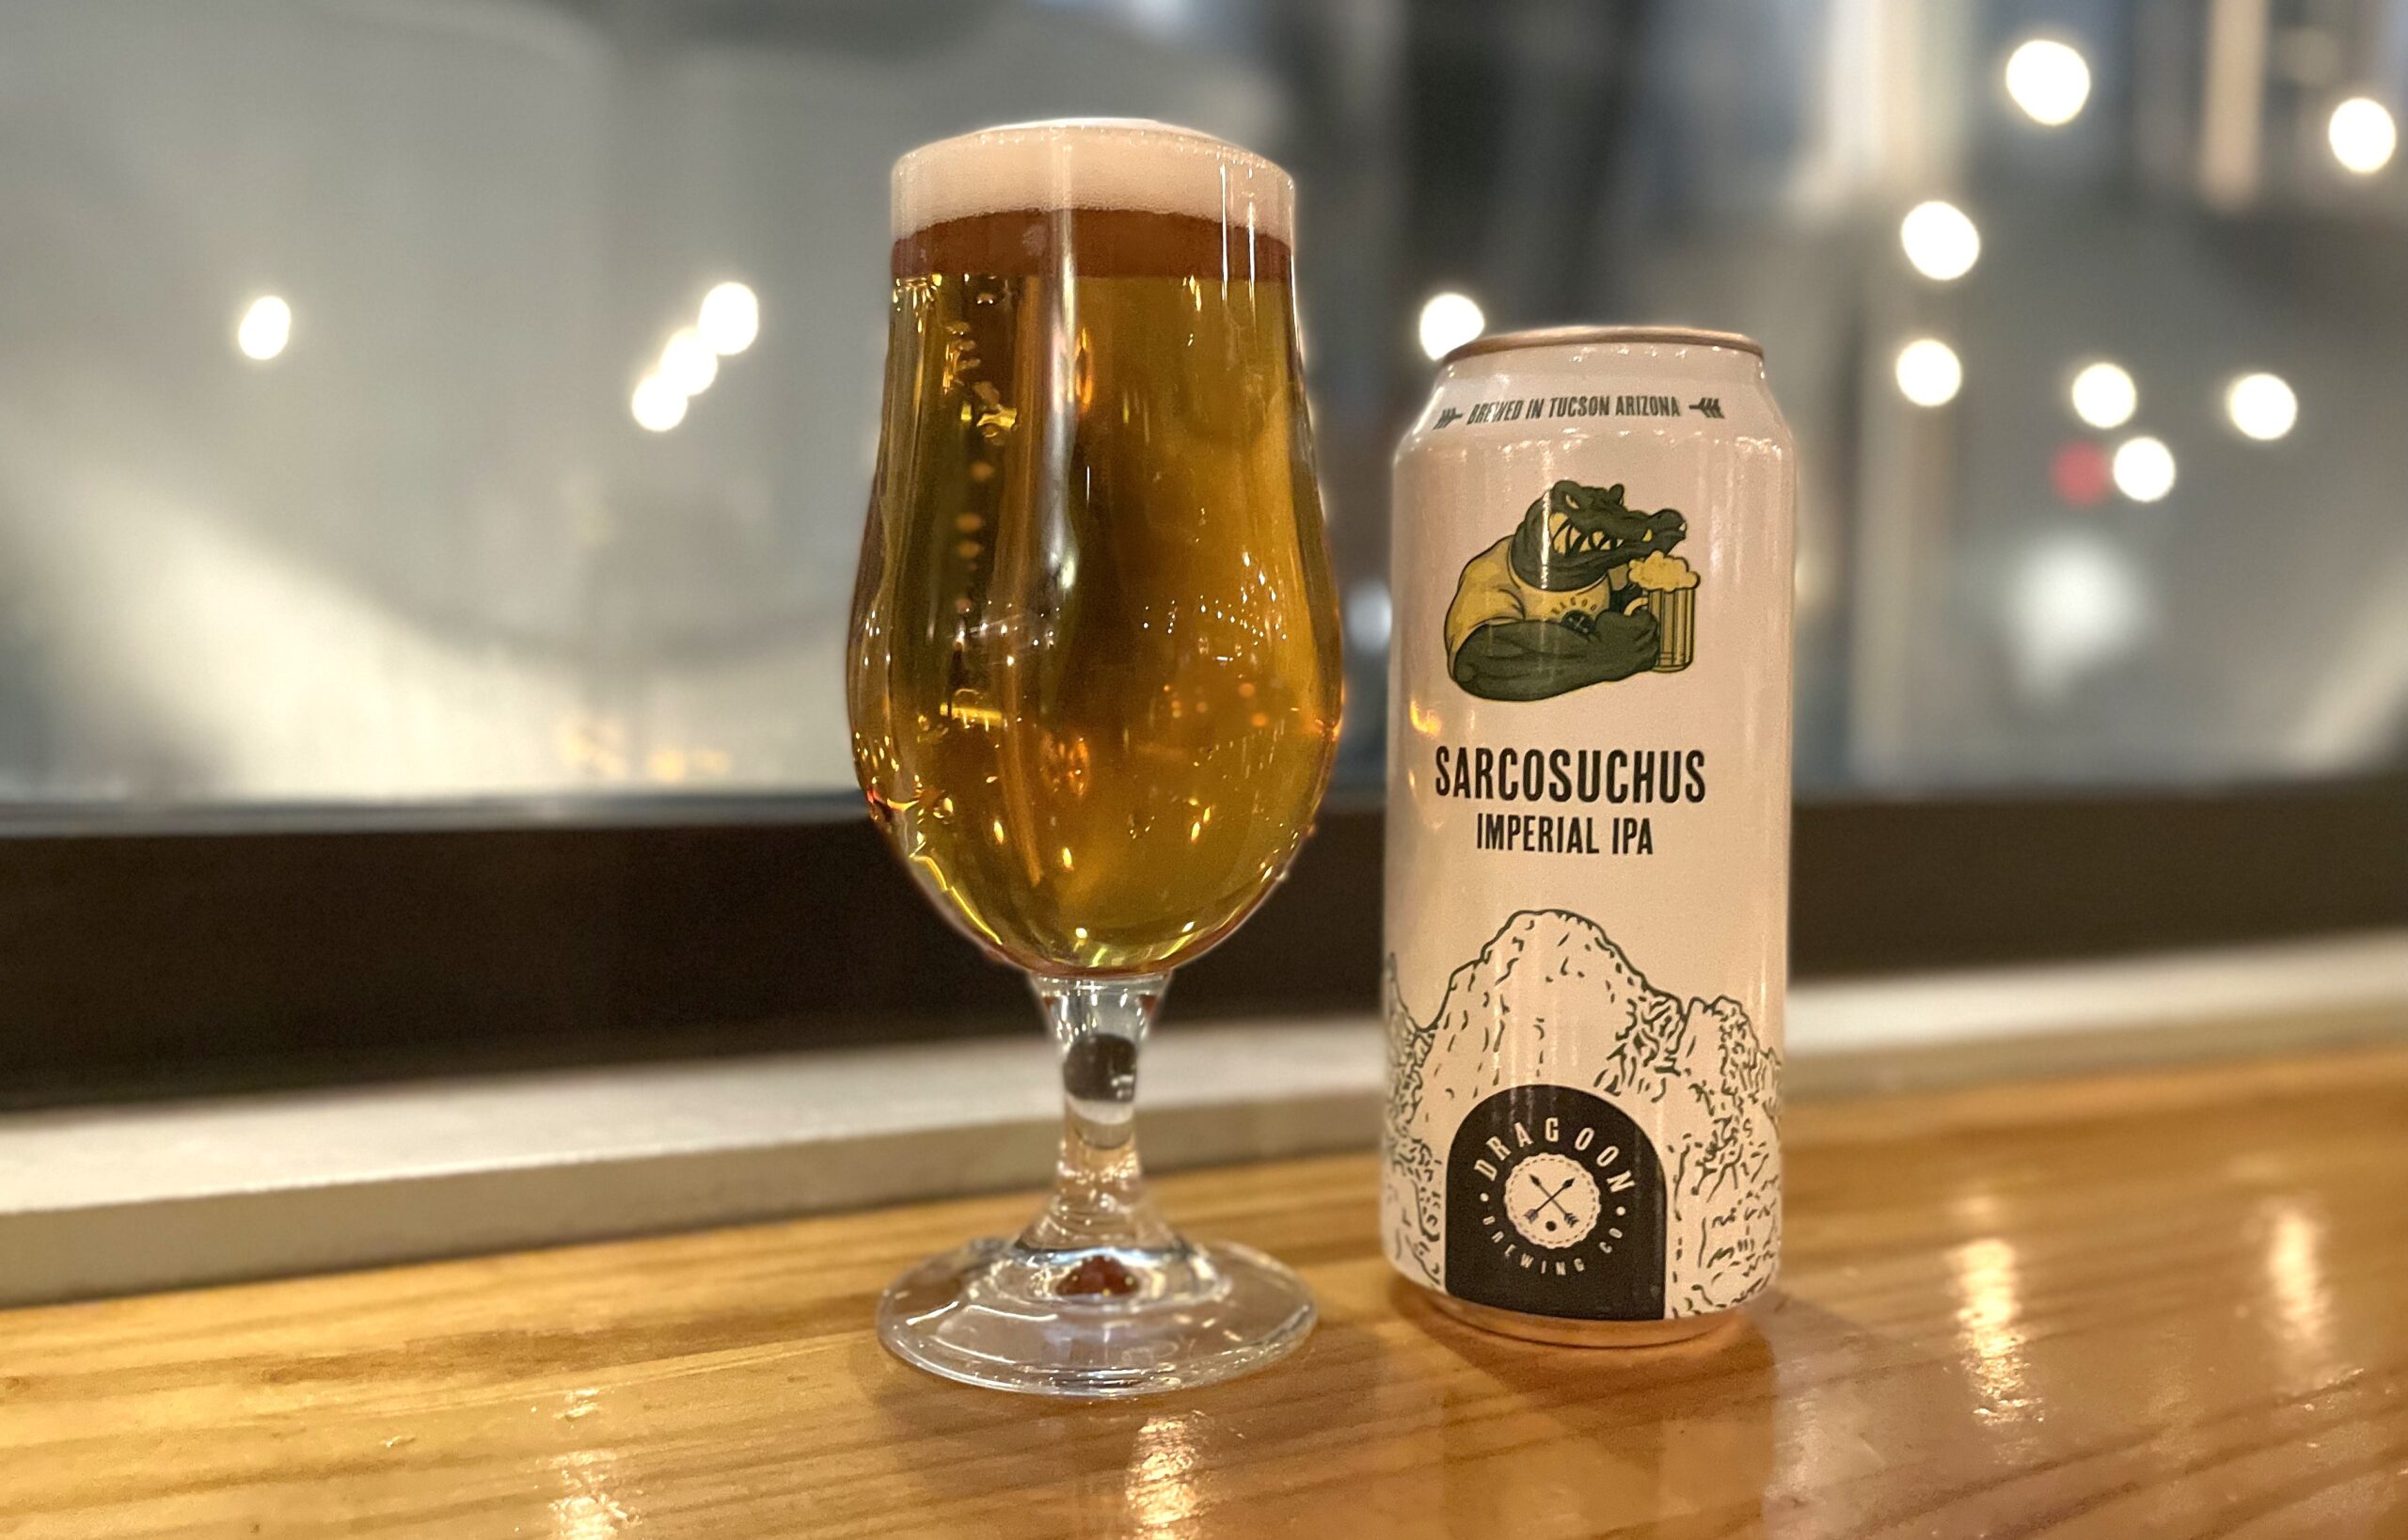 Sarcosuchus Imperial IPA at Dragoon Brewing Company (Photo by Jessie Mance)